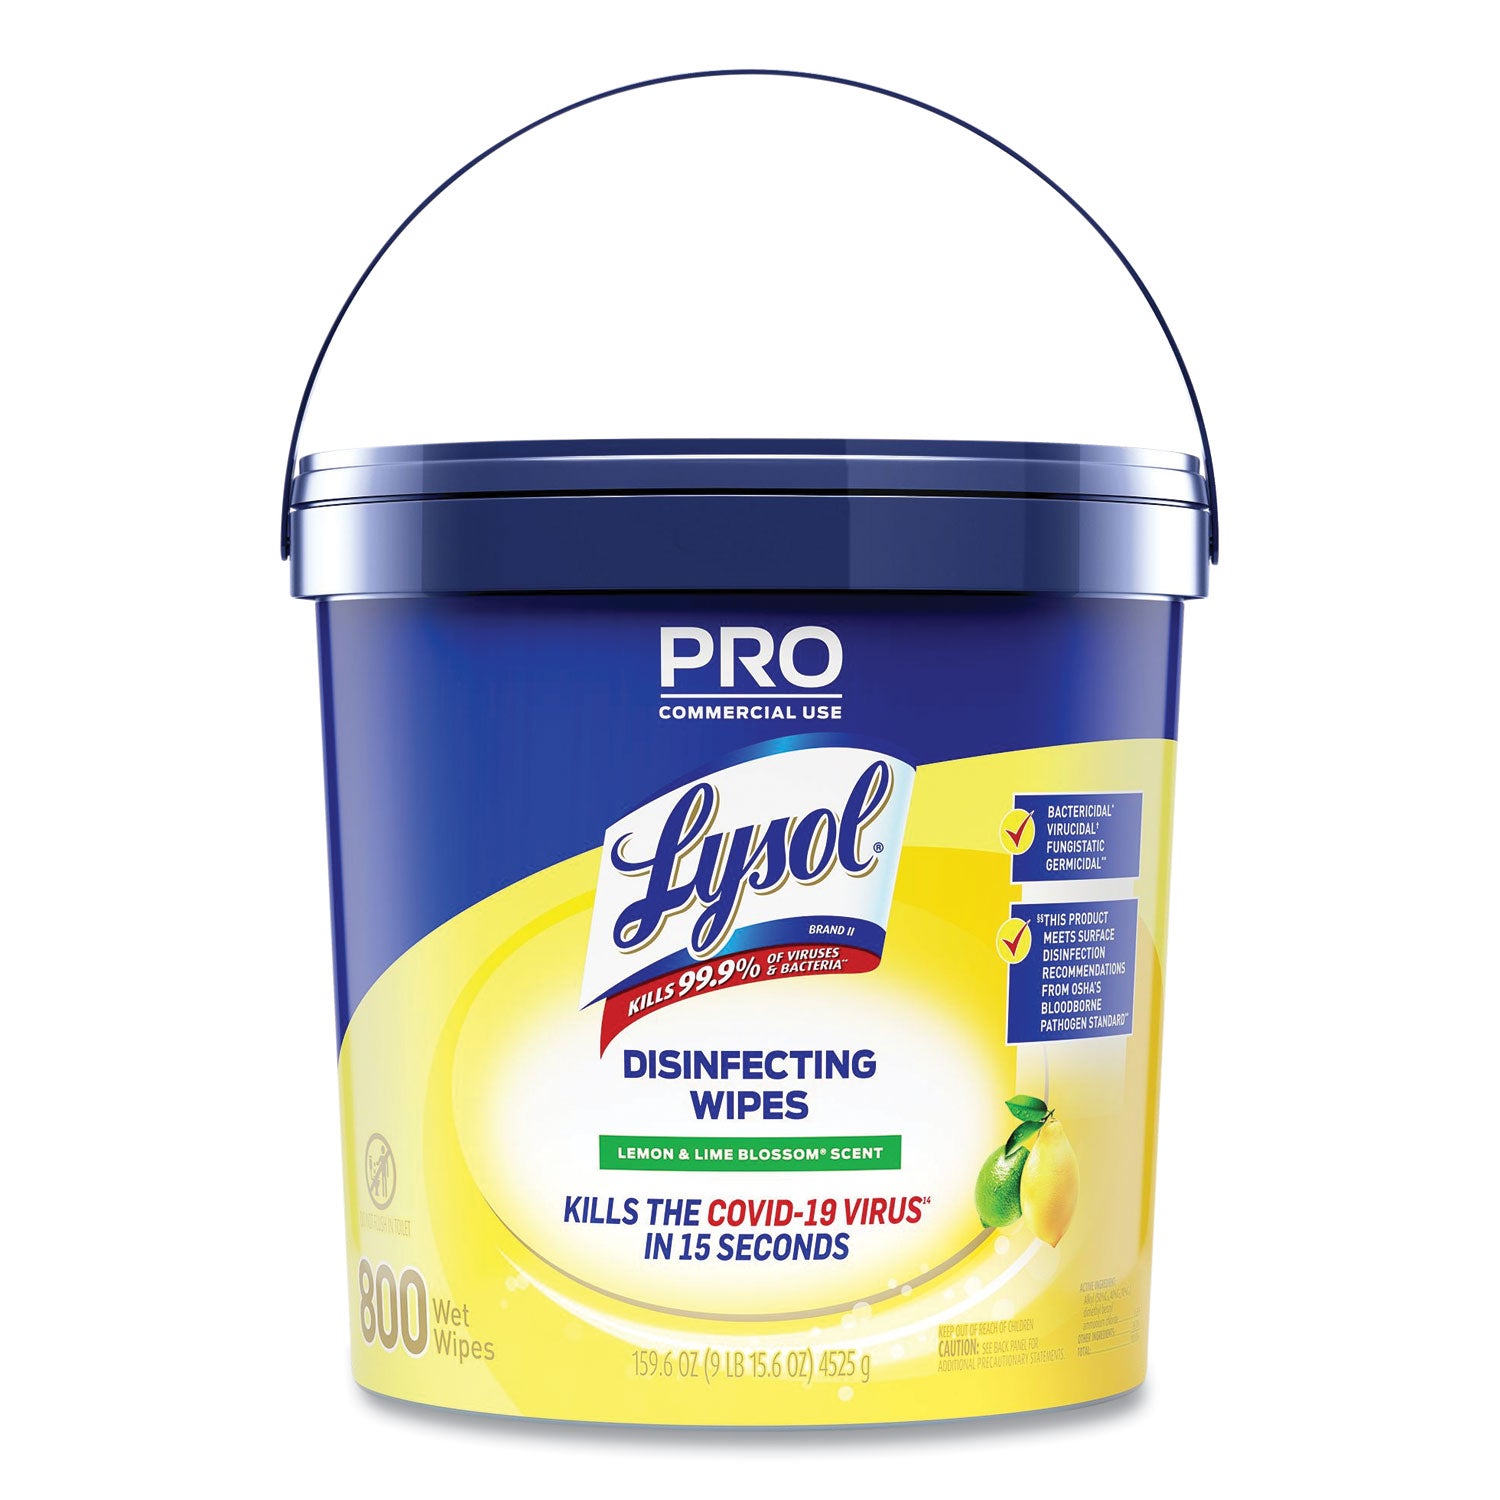 professional-disinfecting-wipe-bucket-1-ply-6-x-8-lemon-and-lime-blossom-white-800-wipes_rac99856ea - 1